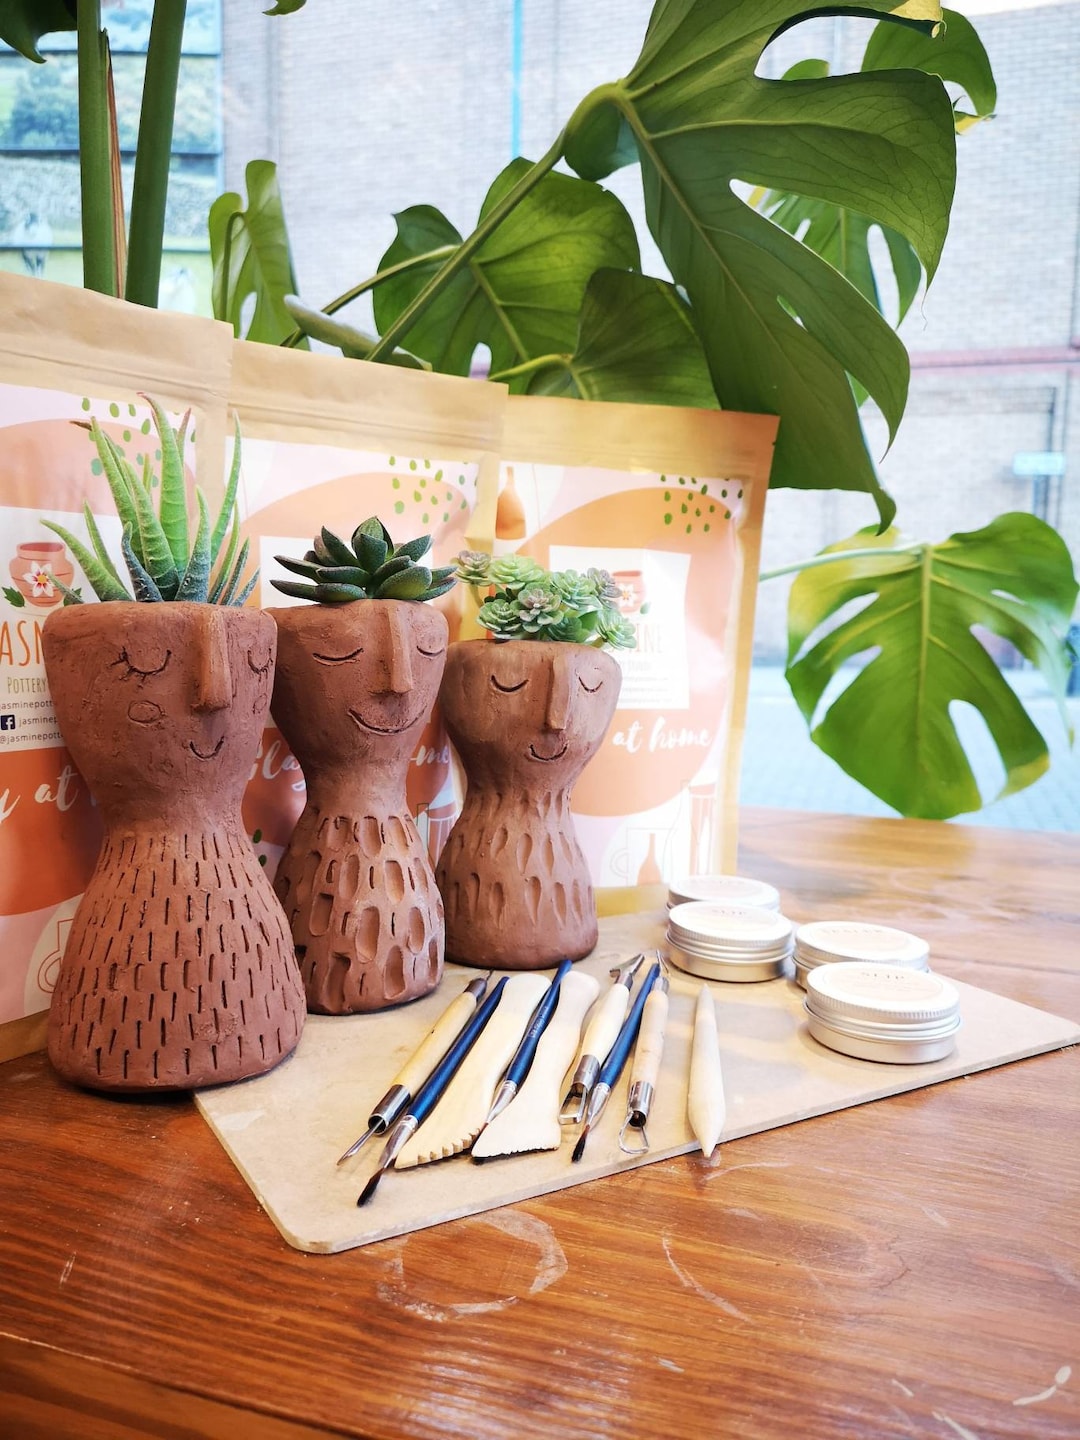 Create Your Own Clay Pottery Kit Home Pottery Craft Kit 1-2 People Air  Drying Clay Sculpting Kit With Tools and Plants -  Israel